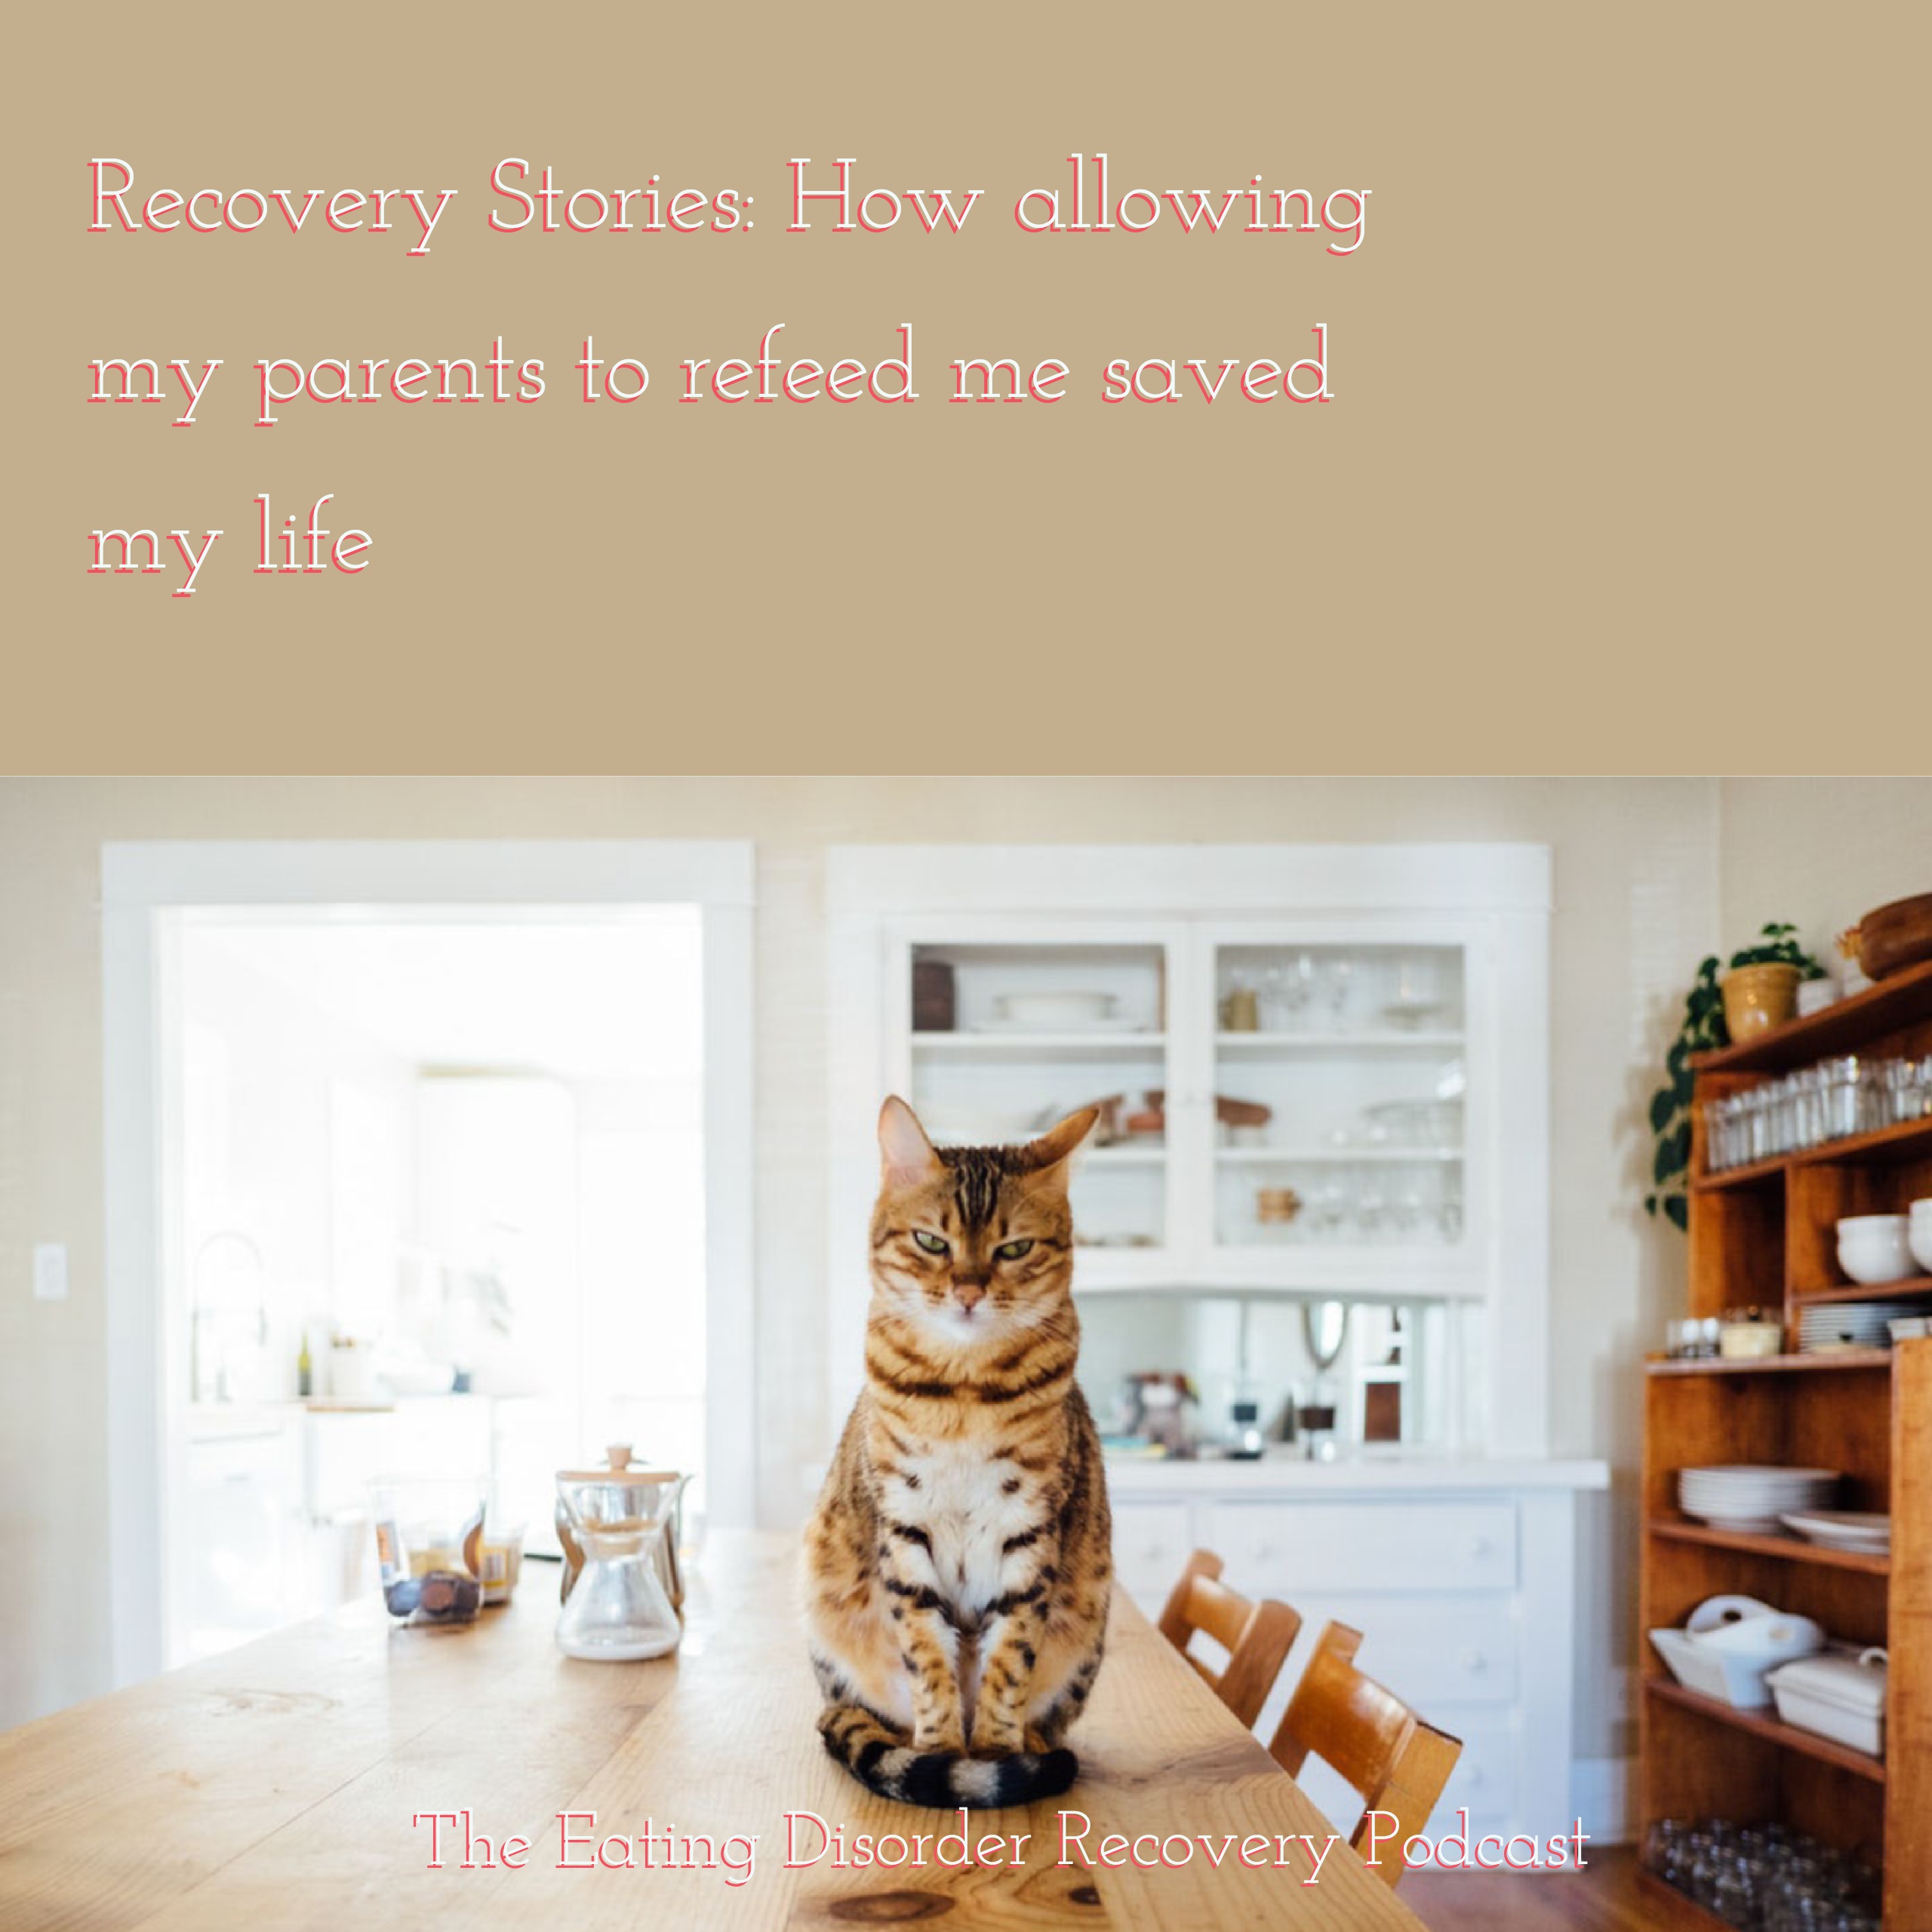 Recovery Stories: How allowing my parents to refeed me saved my life